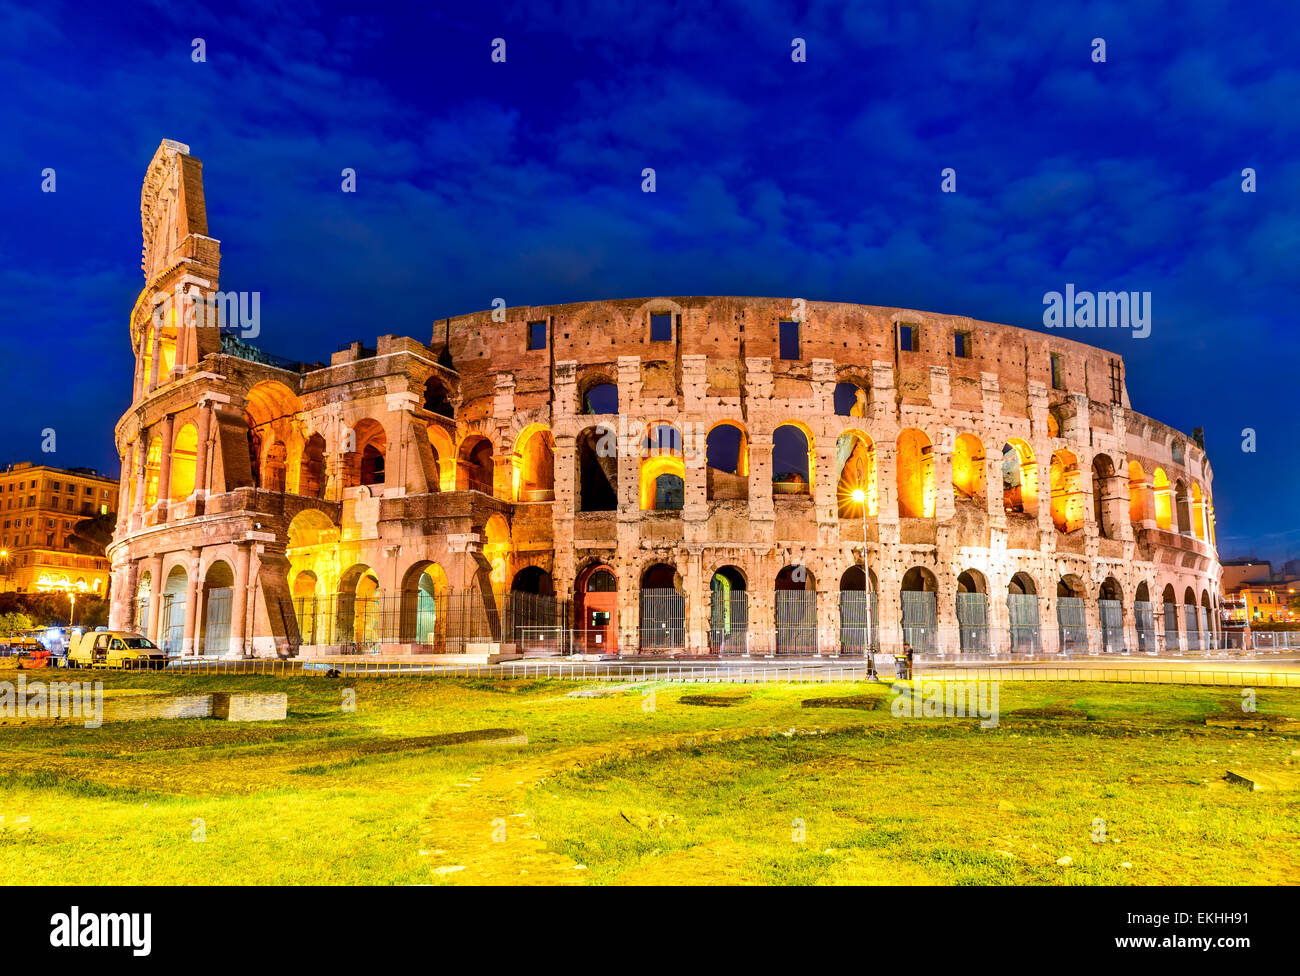 Colosseum, Rome, Italy. Twilight view of Colosseo in Rome, elliptical largest amphitheatre of Roman Empire ancient civilization. Stock Photo